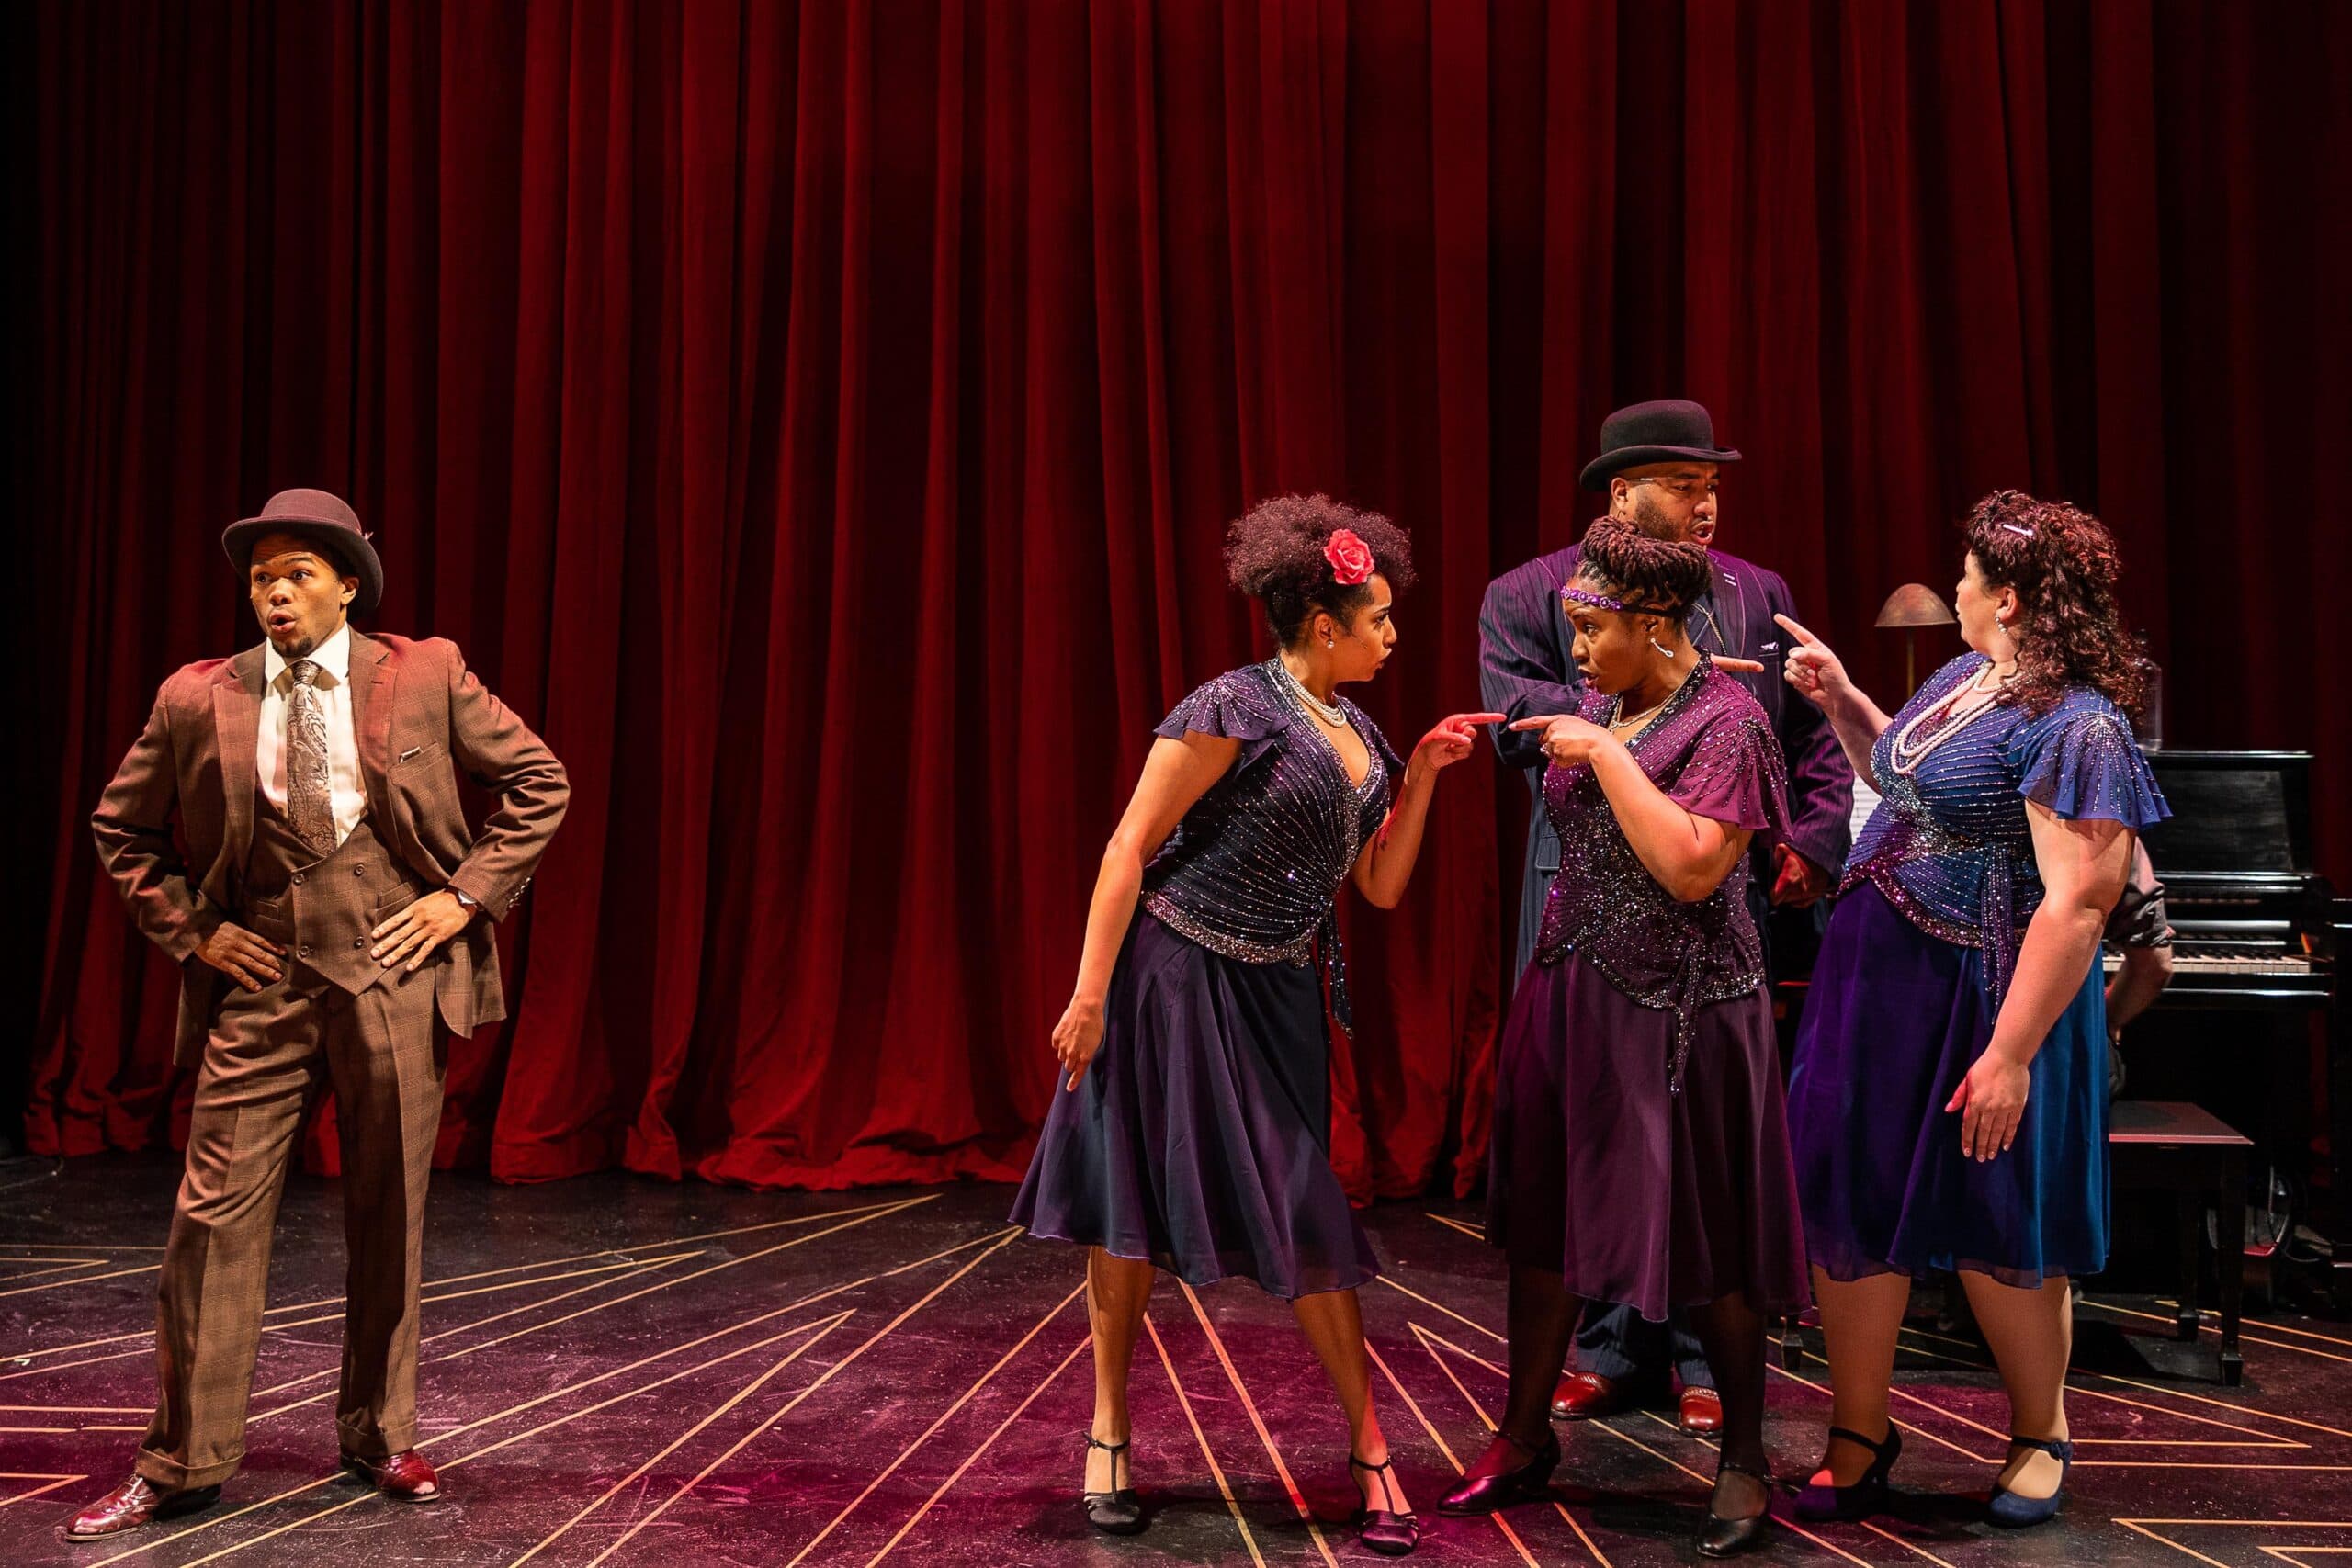 Left to right: Jackson Jirard, Christina Jones, Lovely Hoffman, Anthony Pires Jr. and Sheree Marcelle in &quot;Ain't Misbehavin' - The Fats Waller Musical.&quot; (Courtesy Nile Scott Studios)